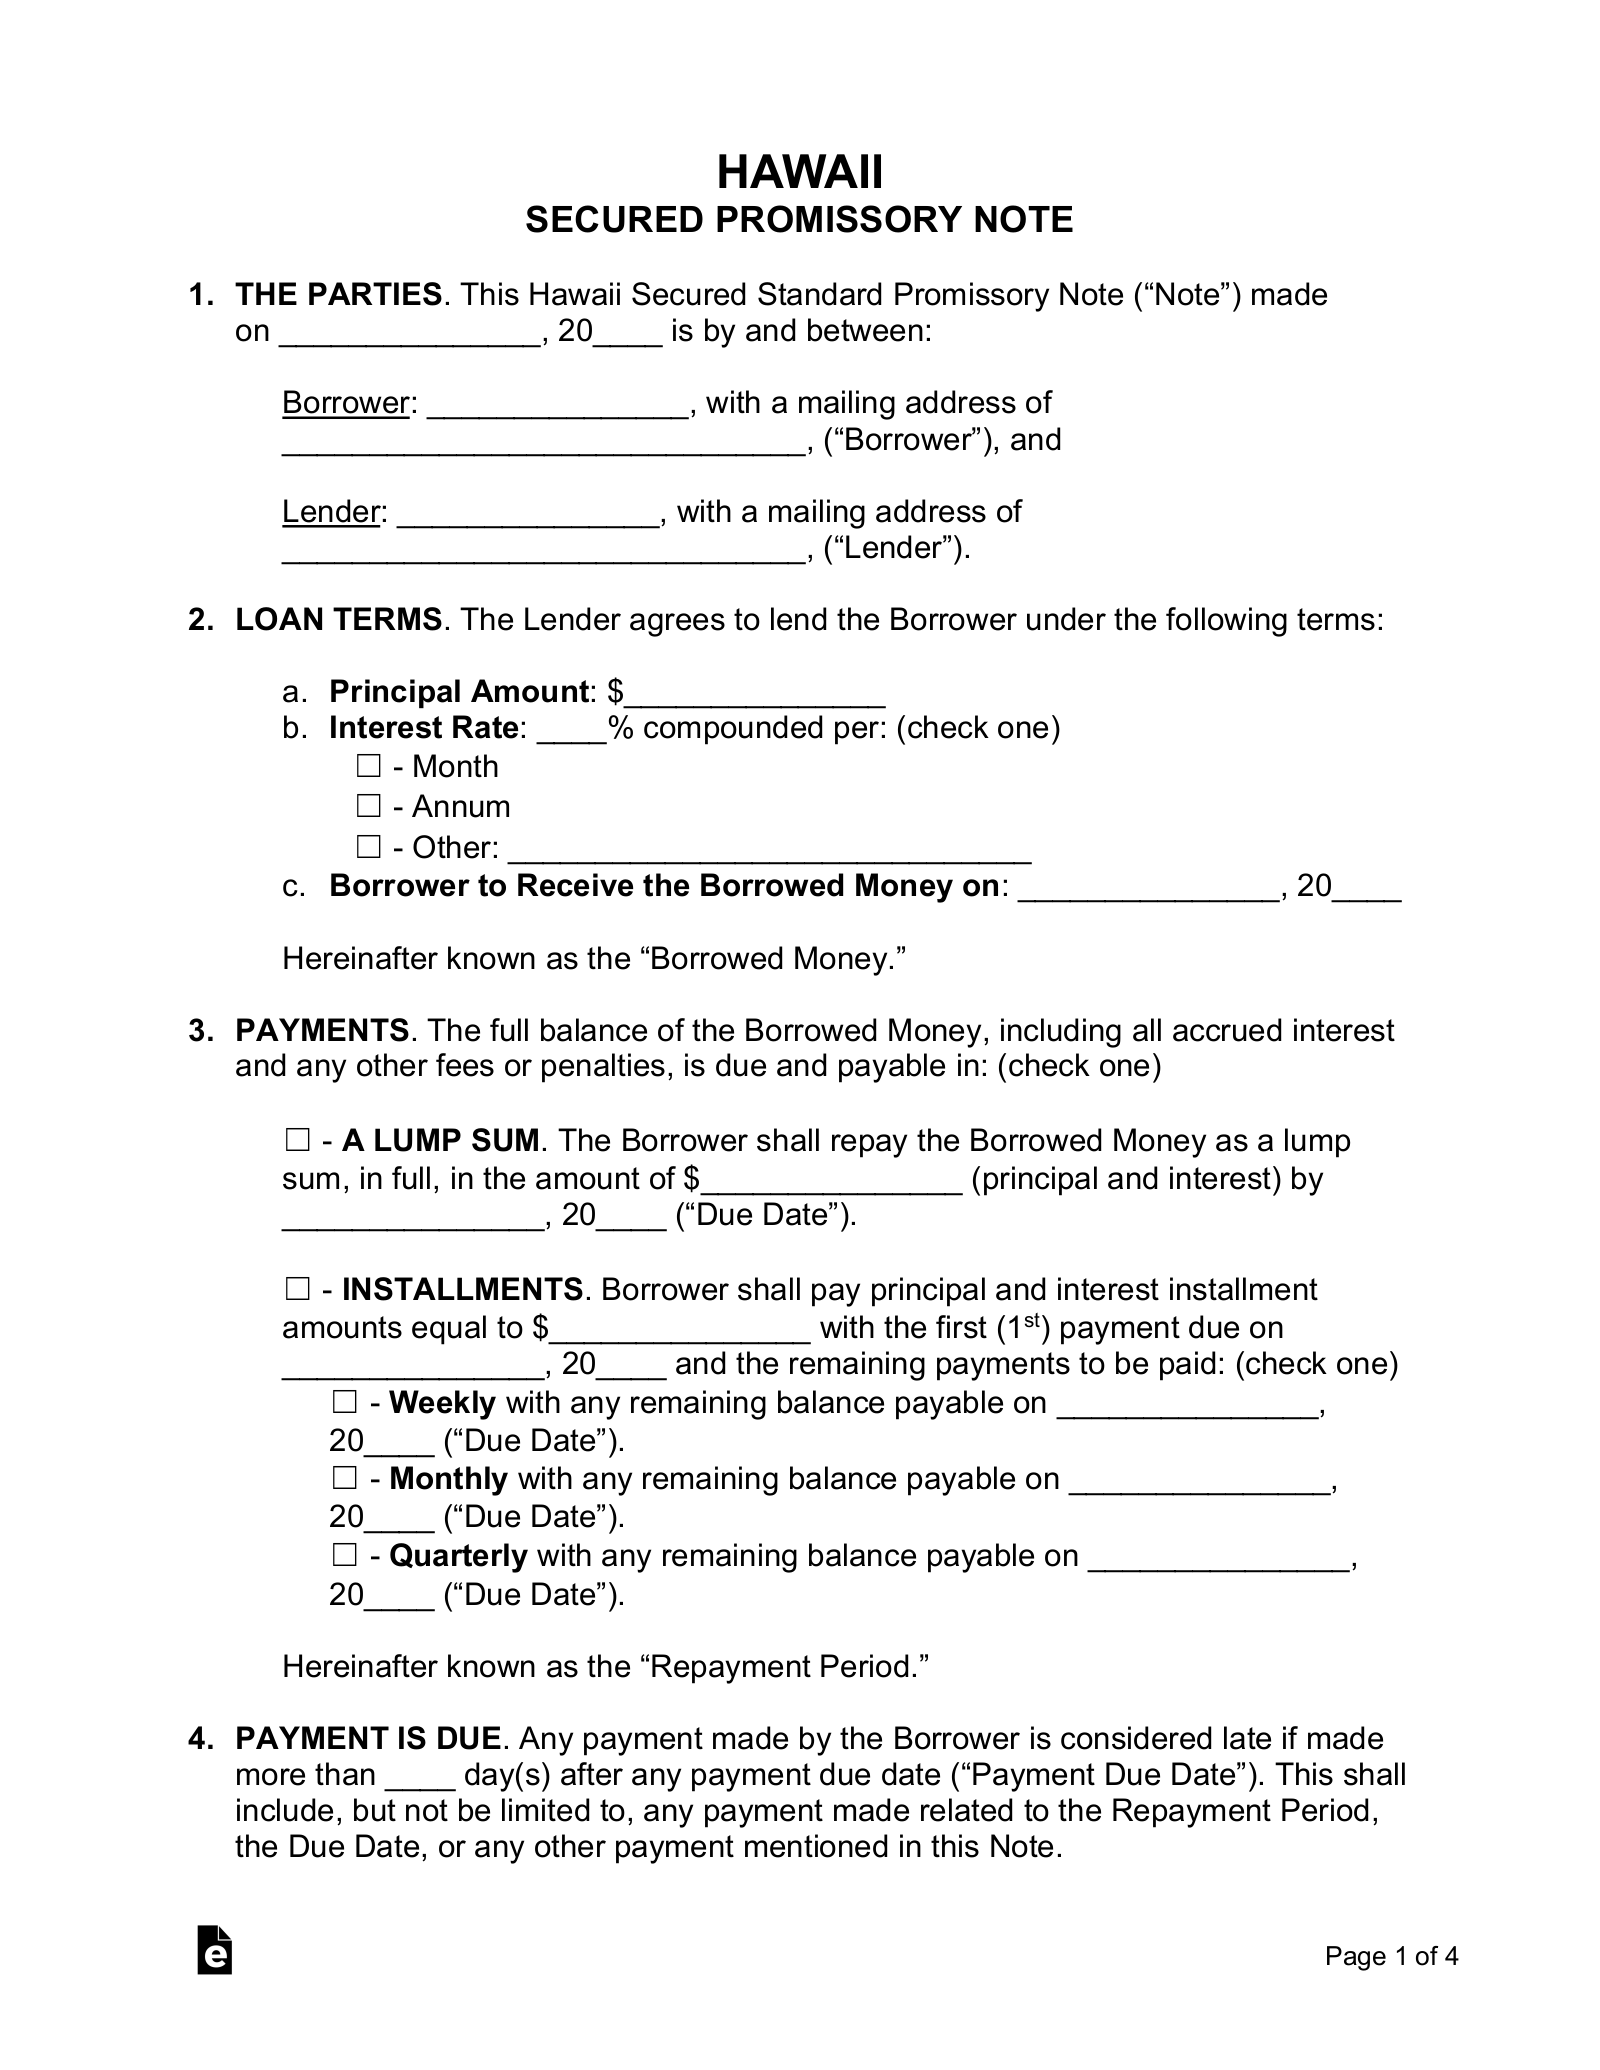 Hawaii Secured Promissory Note Template